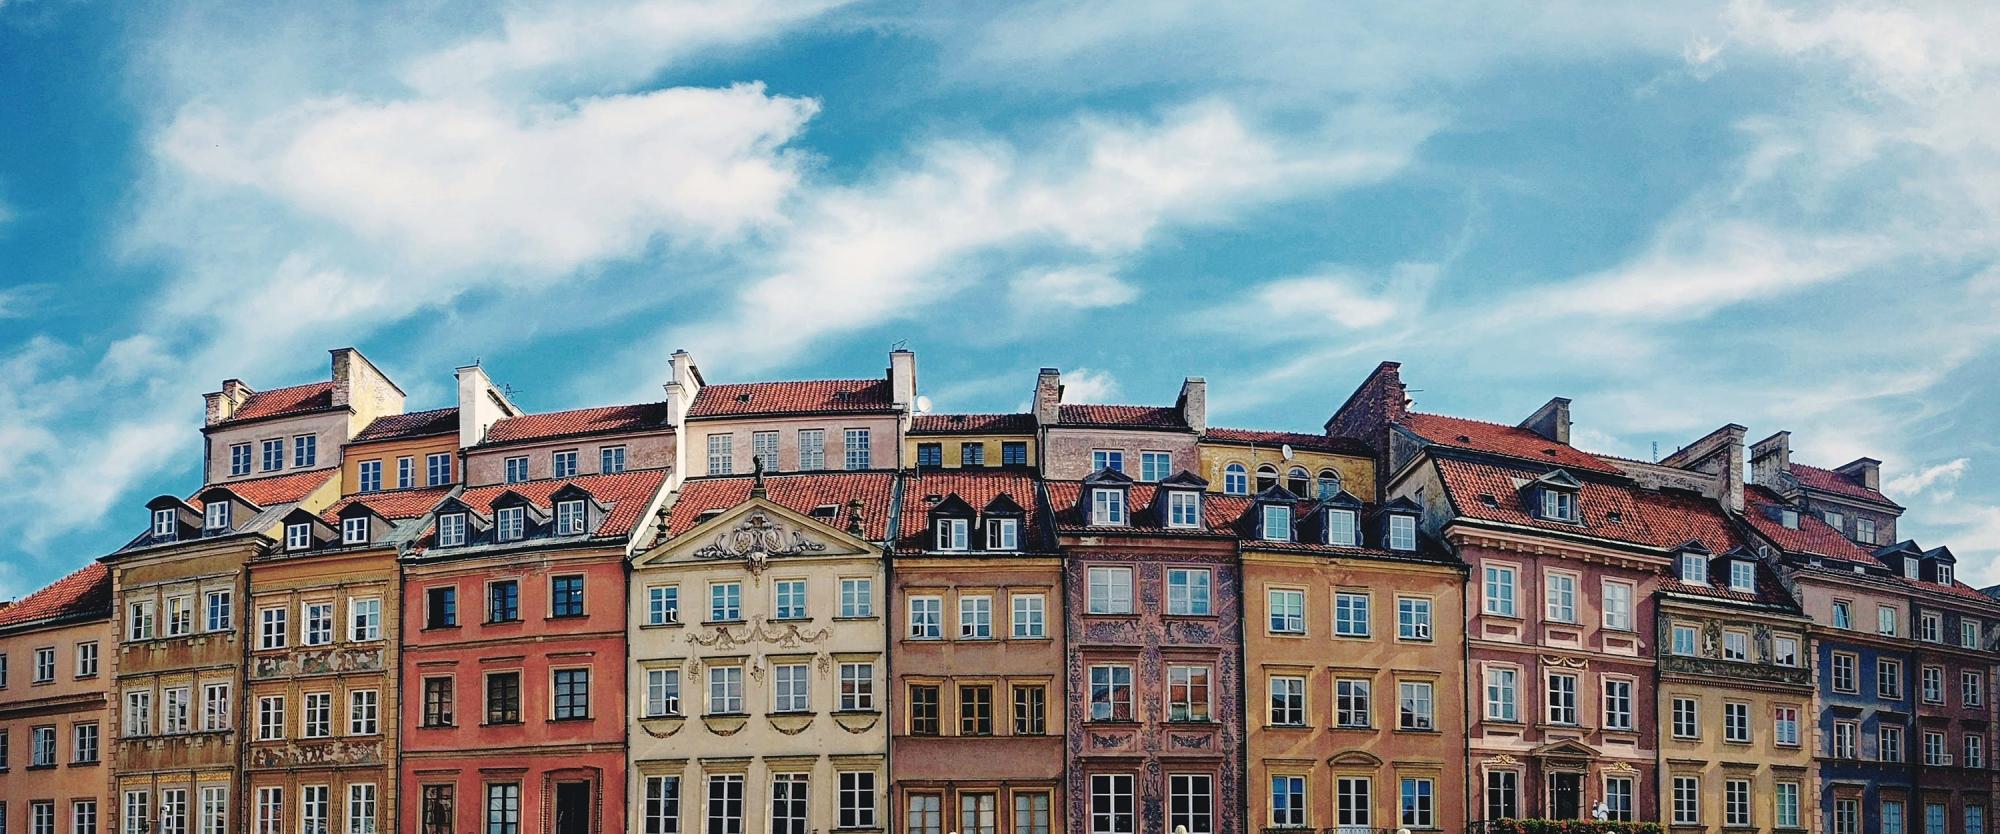 the old city in warsaw